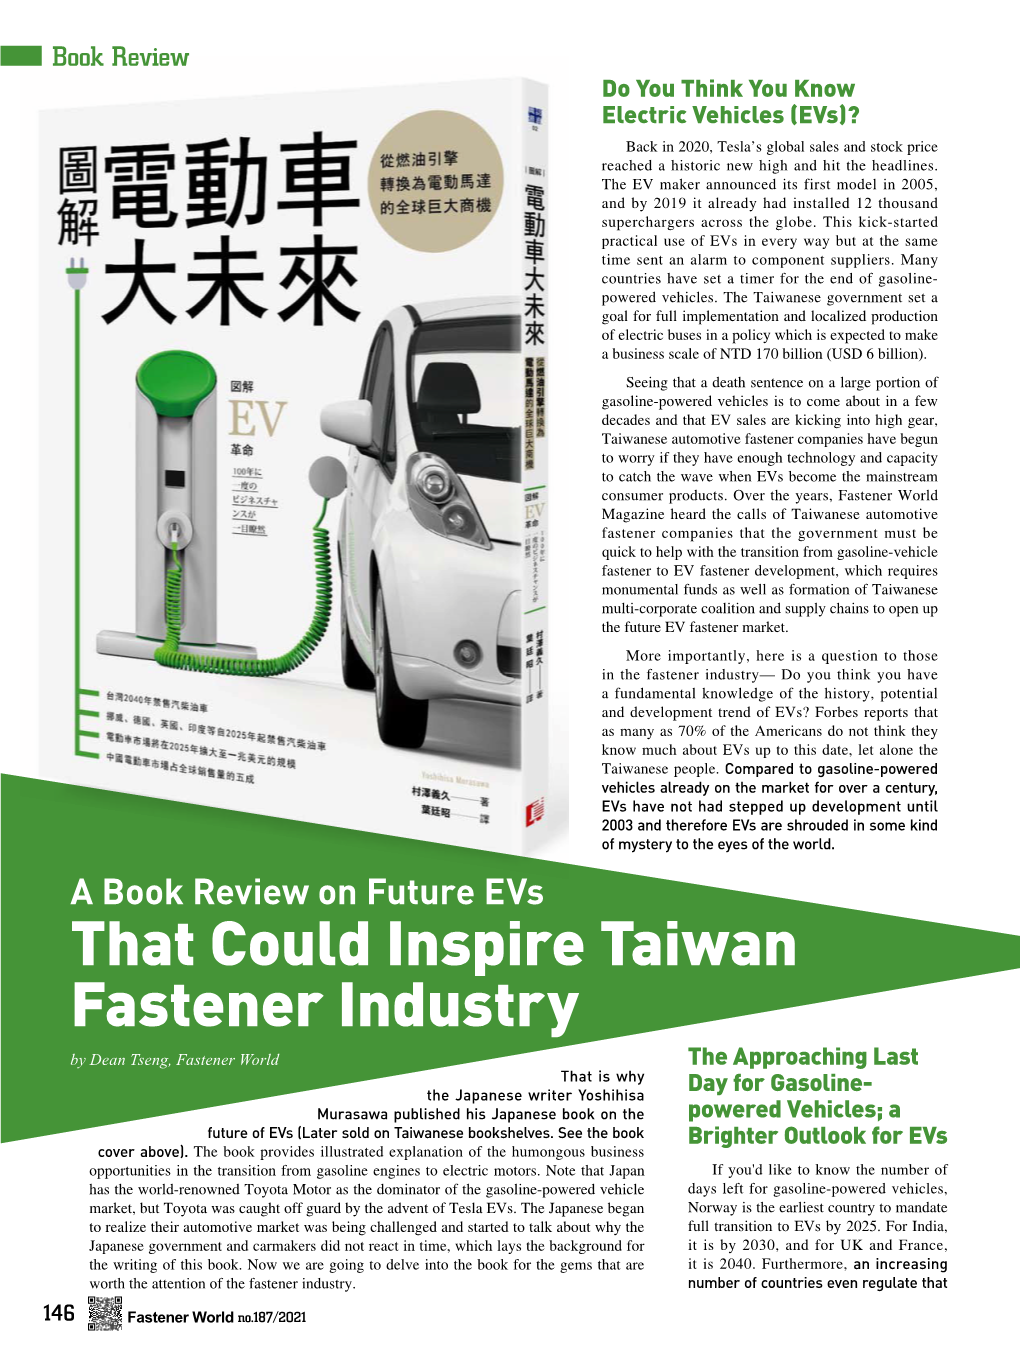 A Book Review on Future Evs That Could Inspire Taiwan Fastener Industry